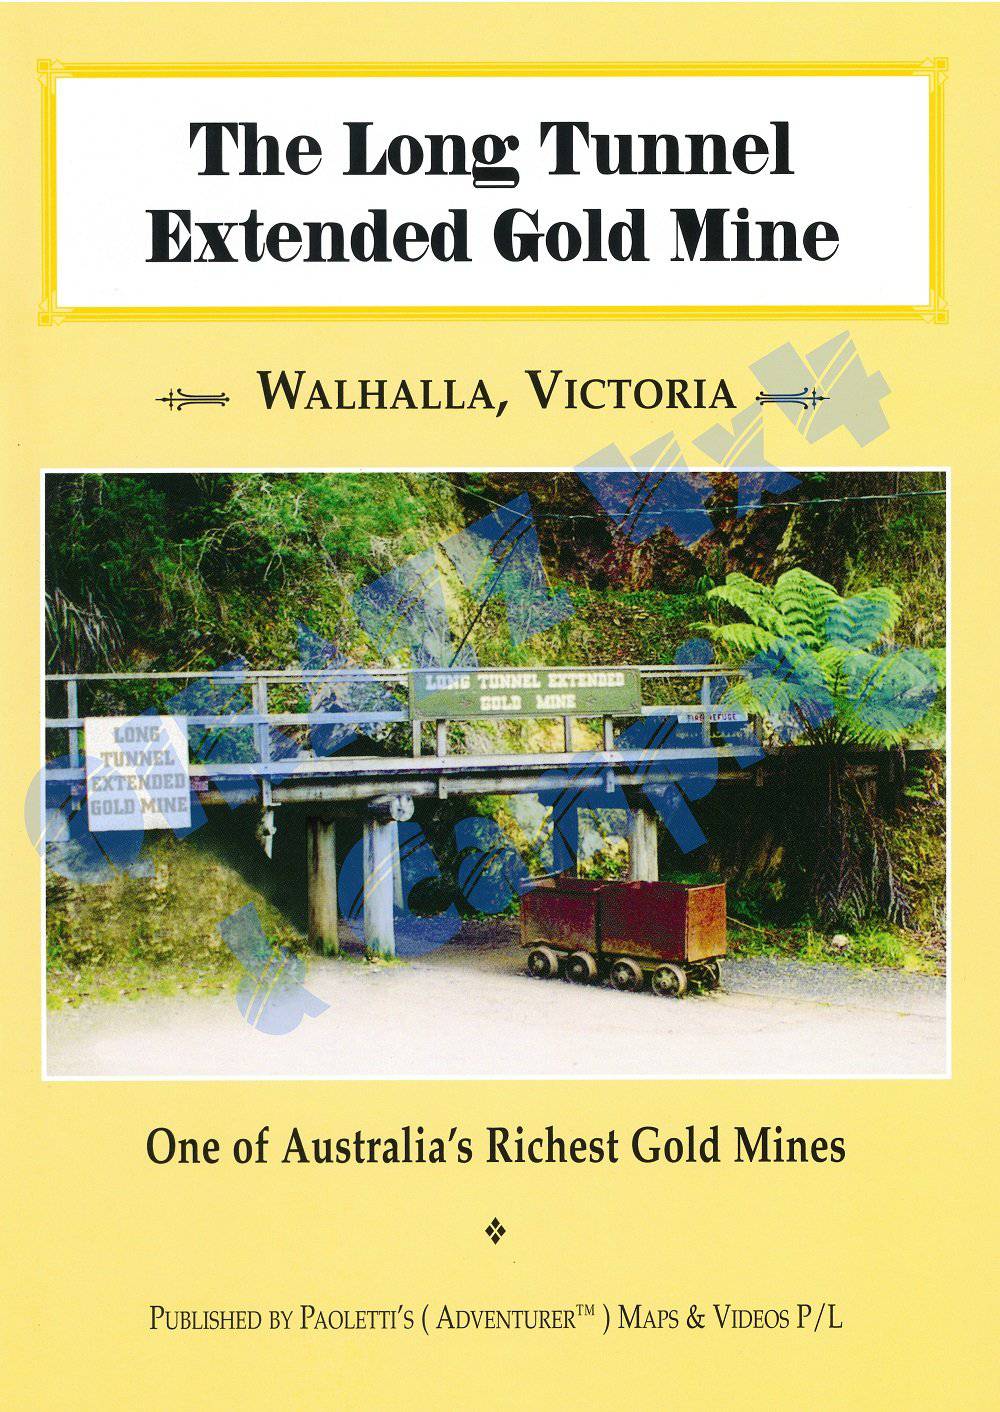 The Long Tunnel Extended Gold Mine- Walhalla, Victoria- A World Famous Gold Mine- by Adventurer Maps | Adventurer Maps